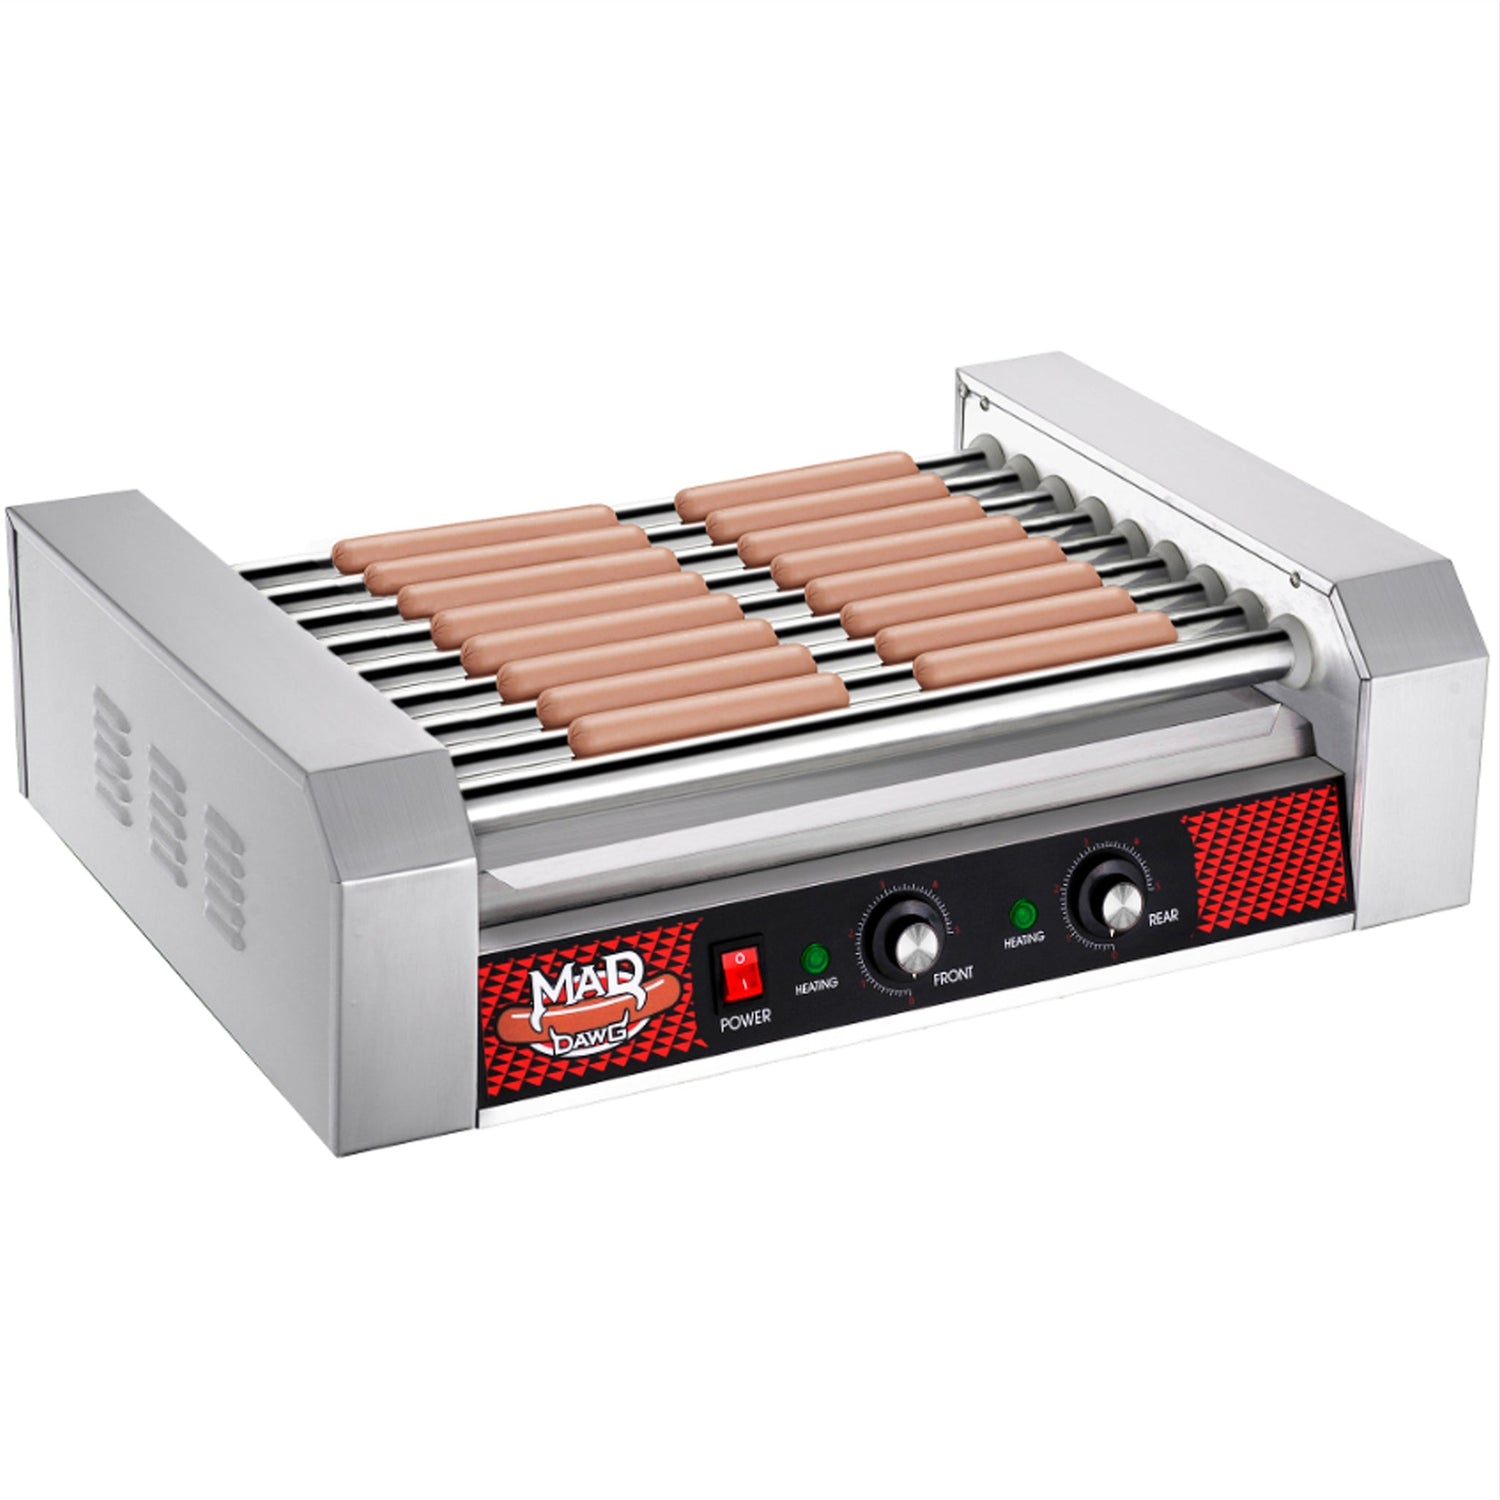 24 Hot Dog 9 Roller Grill Parts